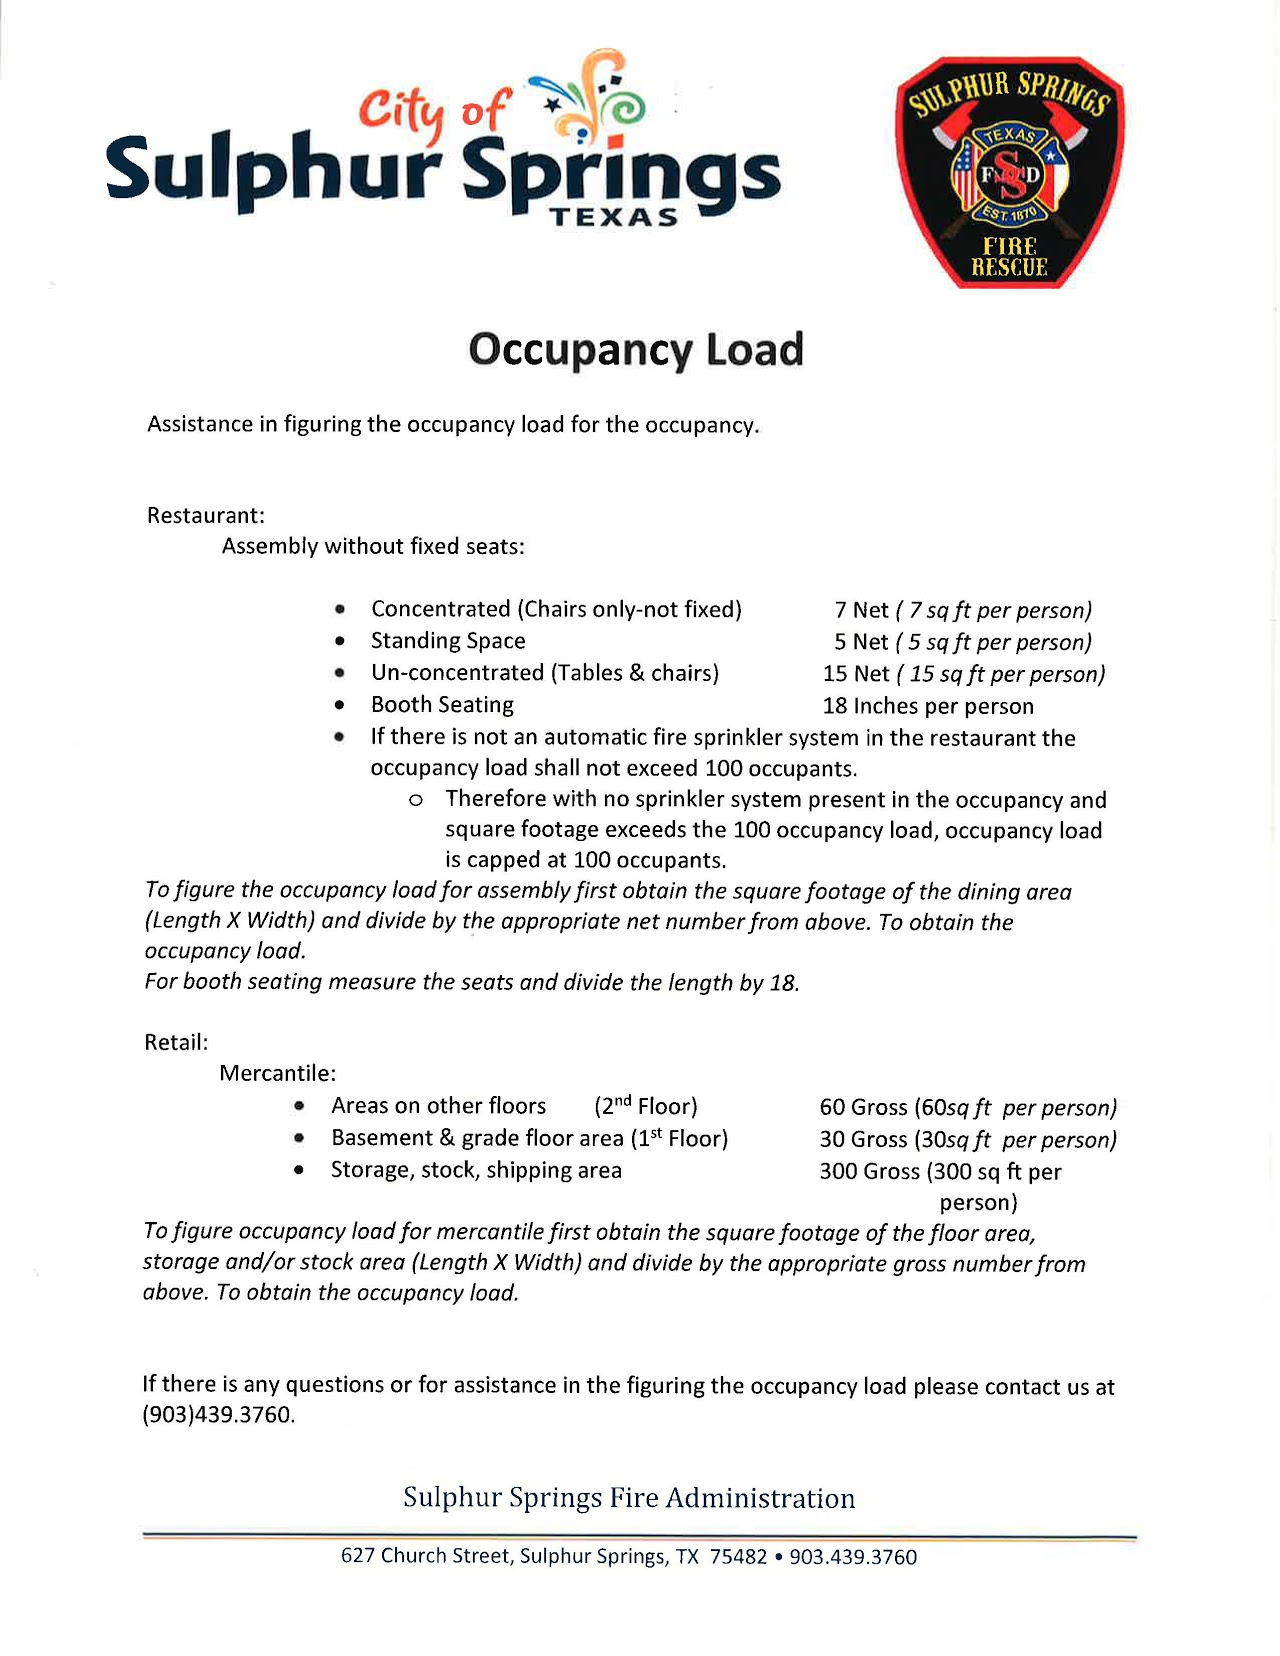 Sulphur Springs Fire Rescue Issues Guidance for Businesses Determining Their Occupancy Load